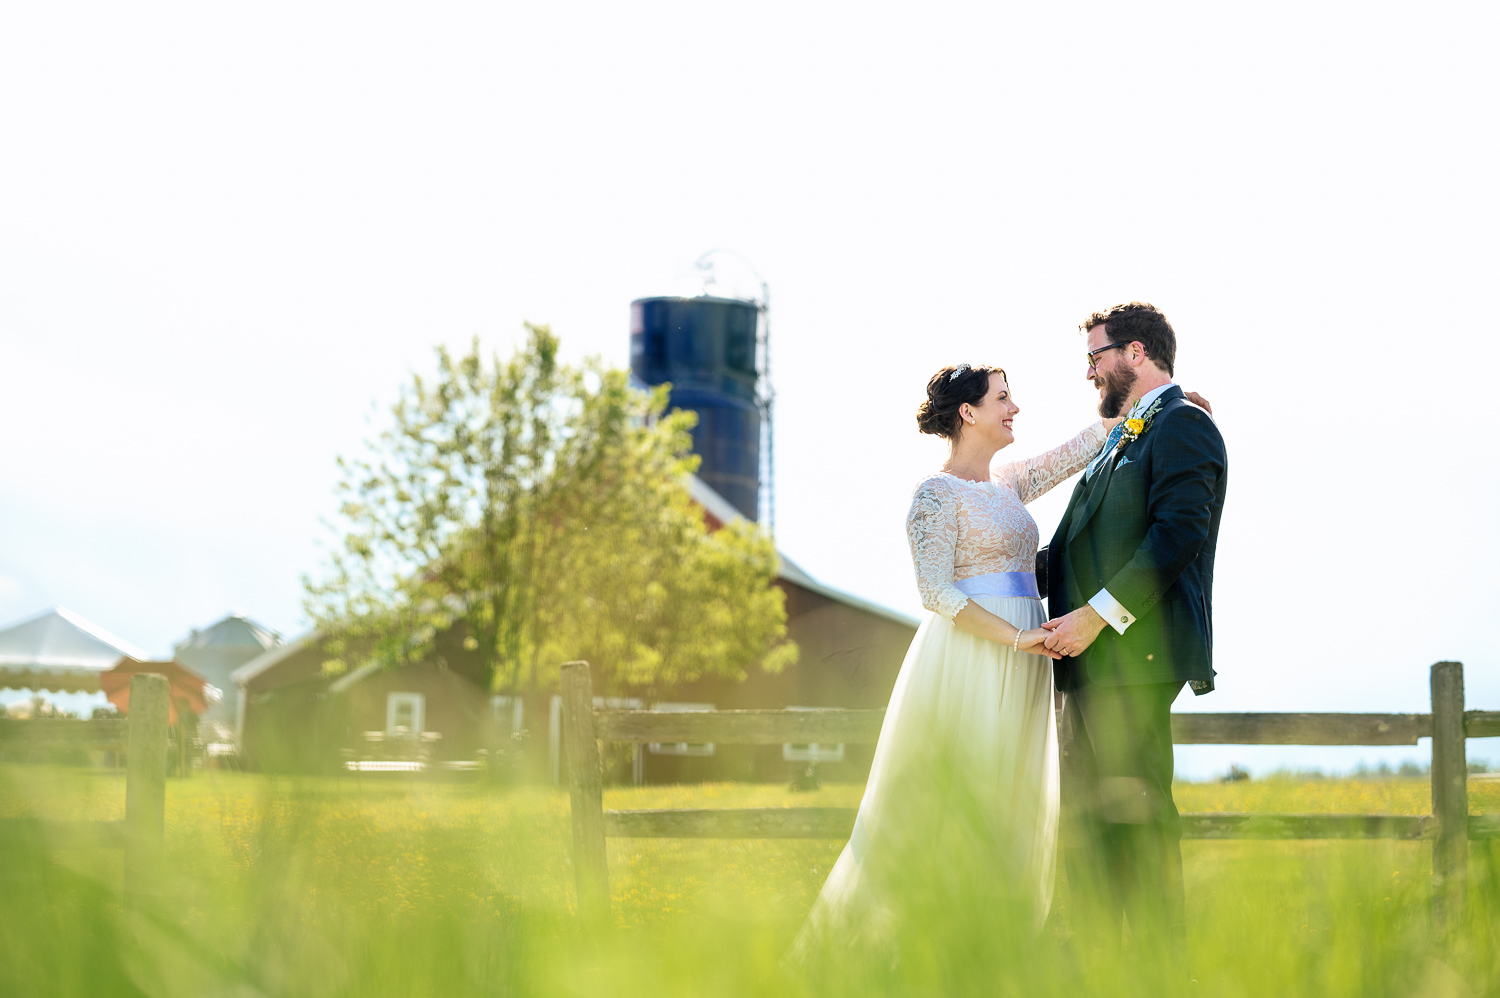 Anne and Jed standing together on their wedding day in front of The Barn at Boyden Farm's wedding barn